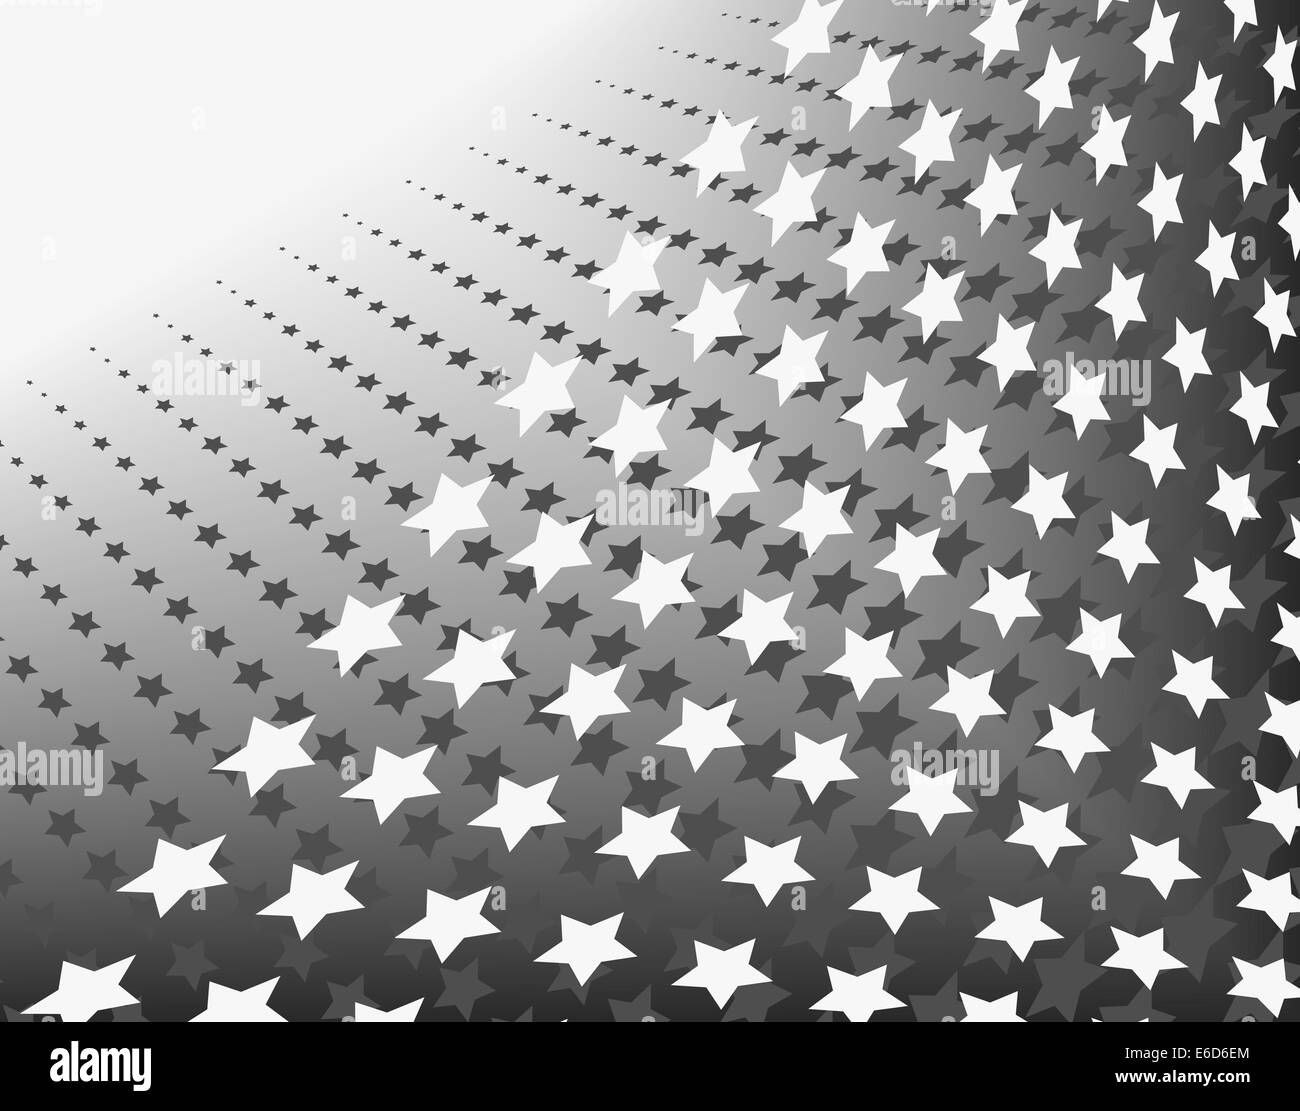 Abstract editable vector design of ranks of star shapes Stock Vector